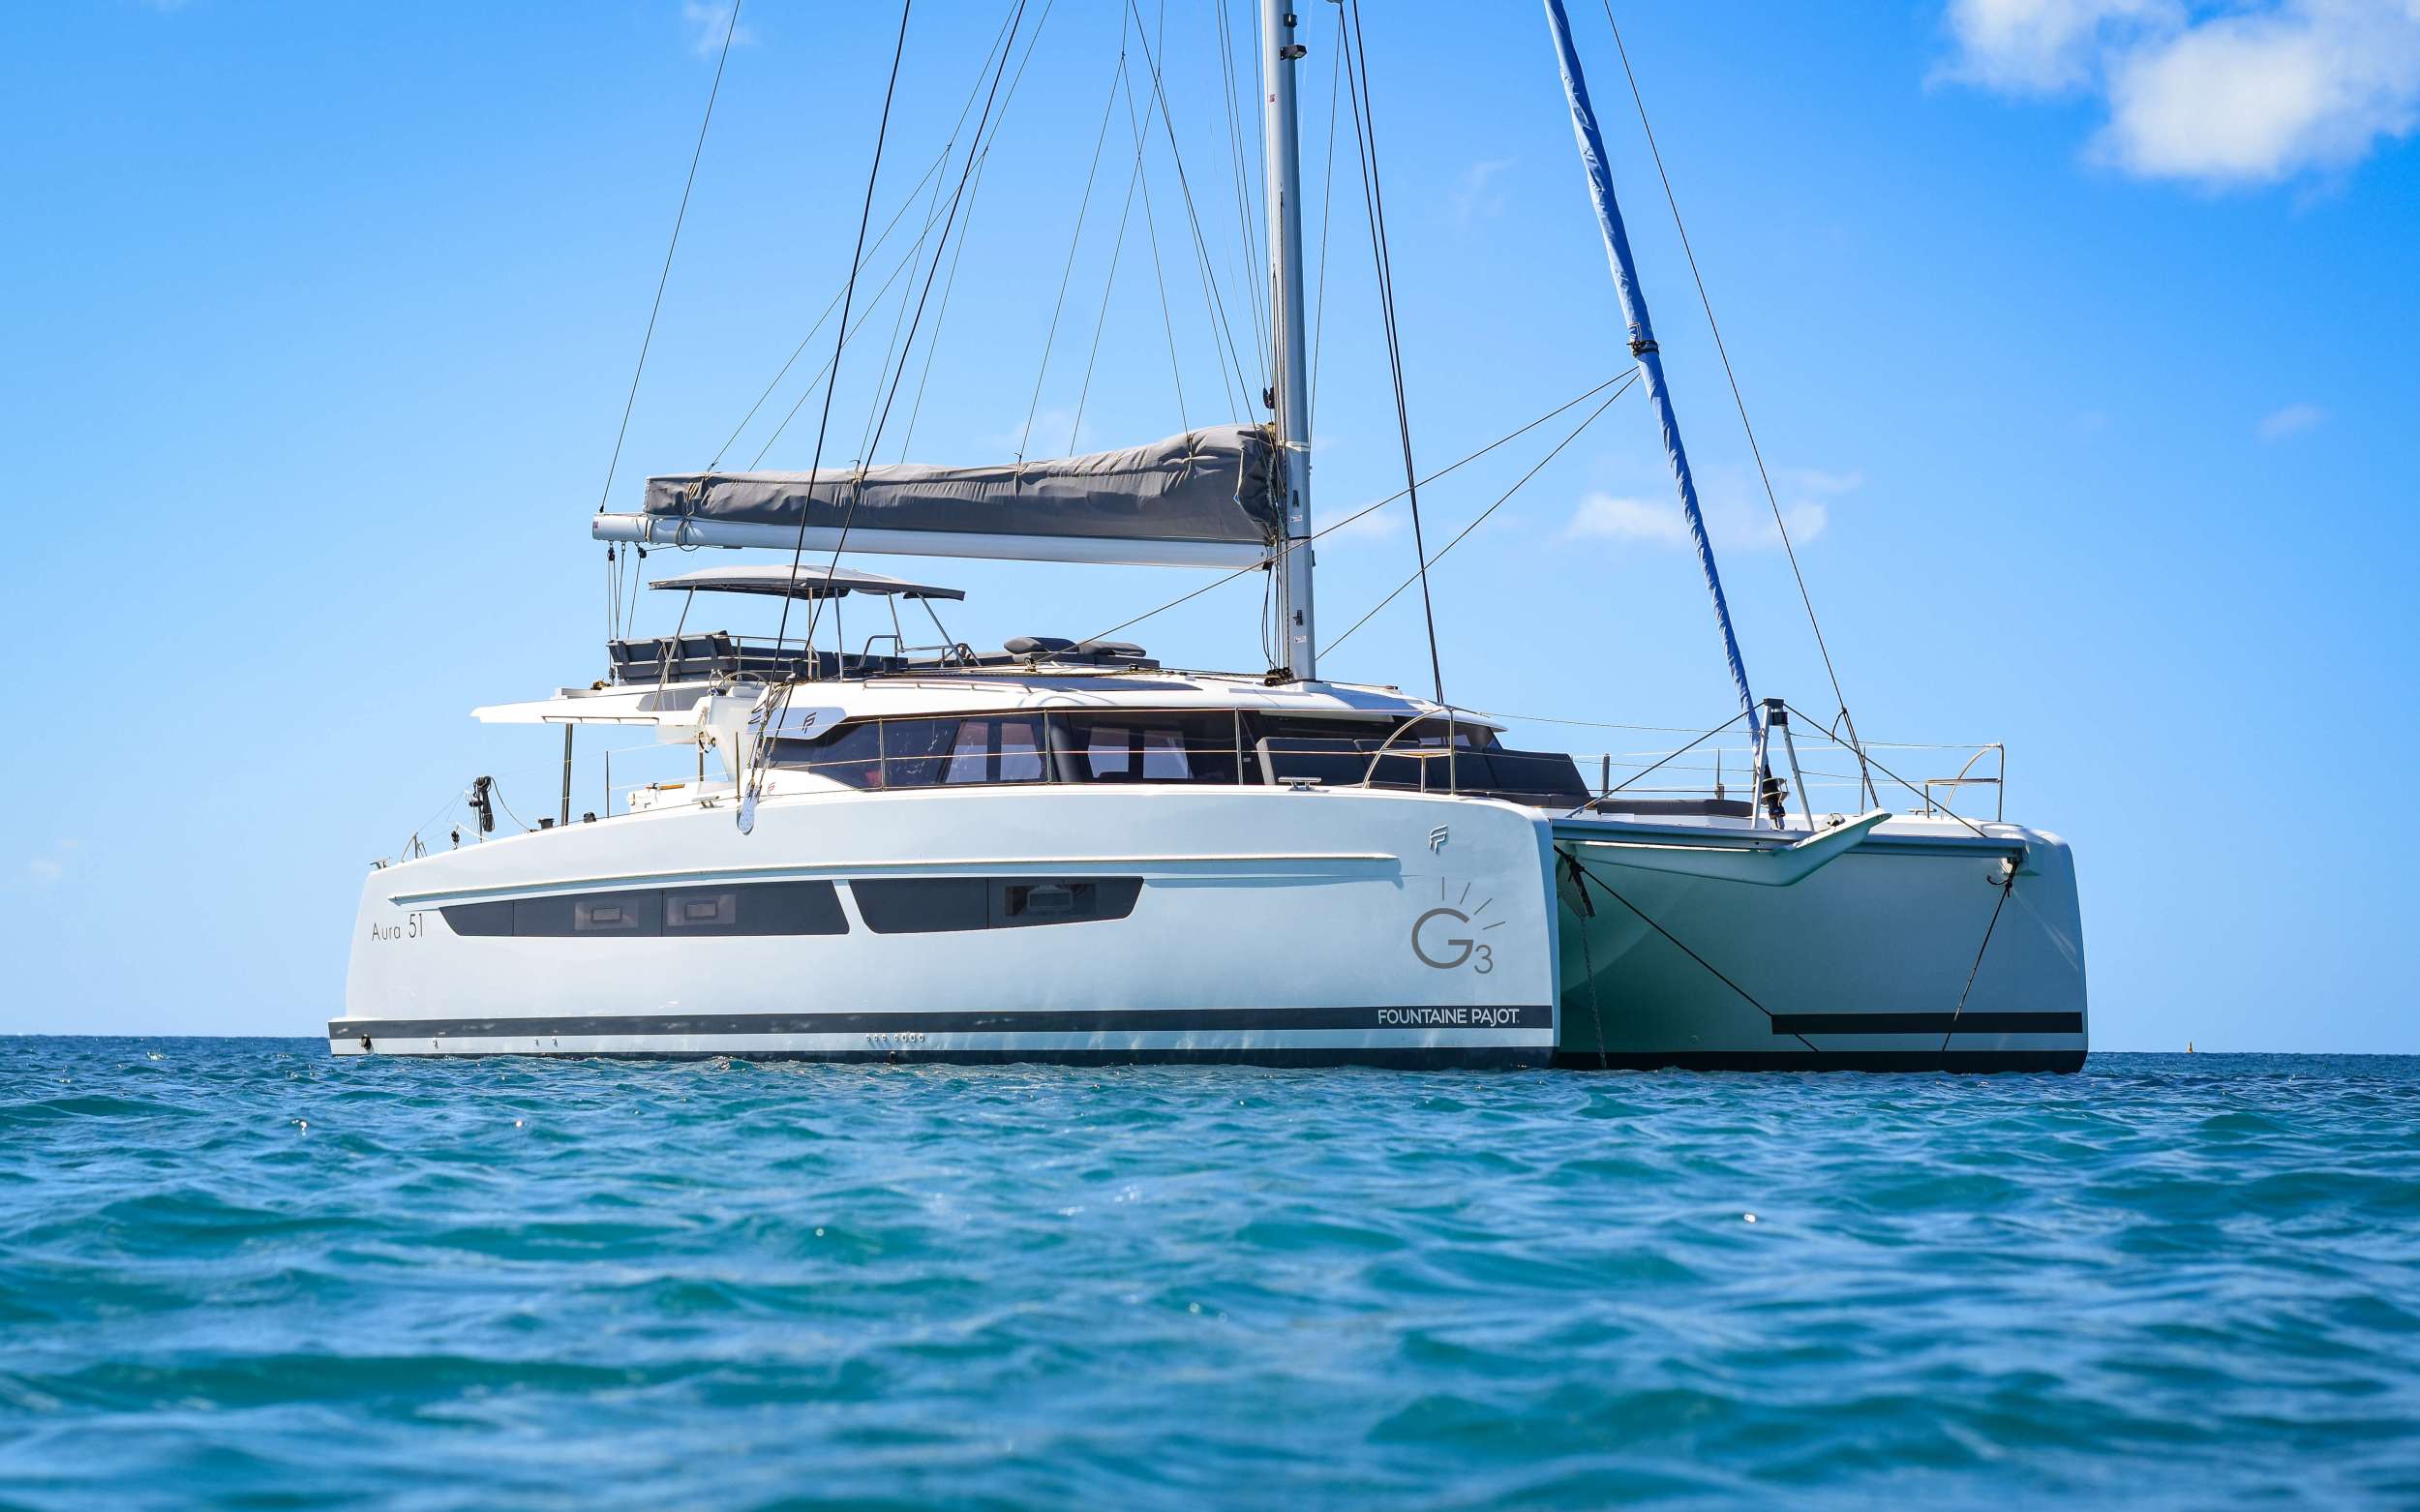 This brand new 2022 51' Fountaine Pajot sailing catamaran is nothing short of extraordinary. G3 takes sailing charter yacht luxury to the next level as she boasts four large queen berths each with private ensuite baths including electric heads, vanity and separate showers. Cabins and yacht common areas offer wonderful natural lighting and great ventilation with full custom air-conditioning. The salon will seat all guests in comfort for lounging or dining with the exterior offering an alfresco dining experience to remember. Top deck seating and villa-style aft lounge area make this charter yacht one-of-a-kind. With numerous lounging areas to stretch out, there is plenty of space for gathering as a group or finding a private place for one or two to take all the Caribbean in.